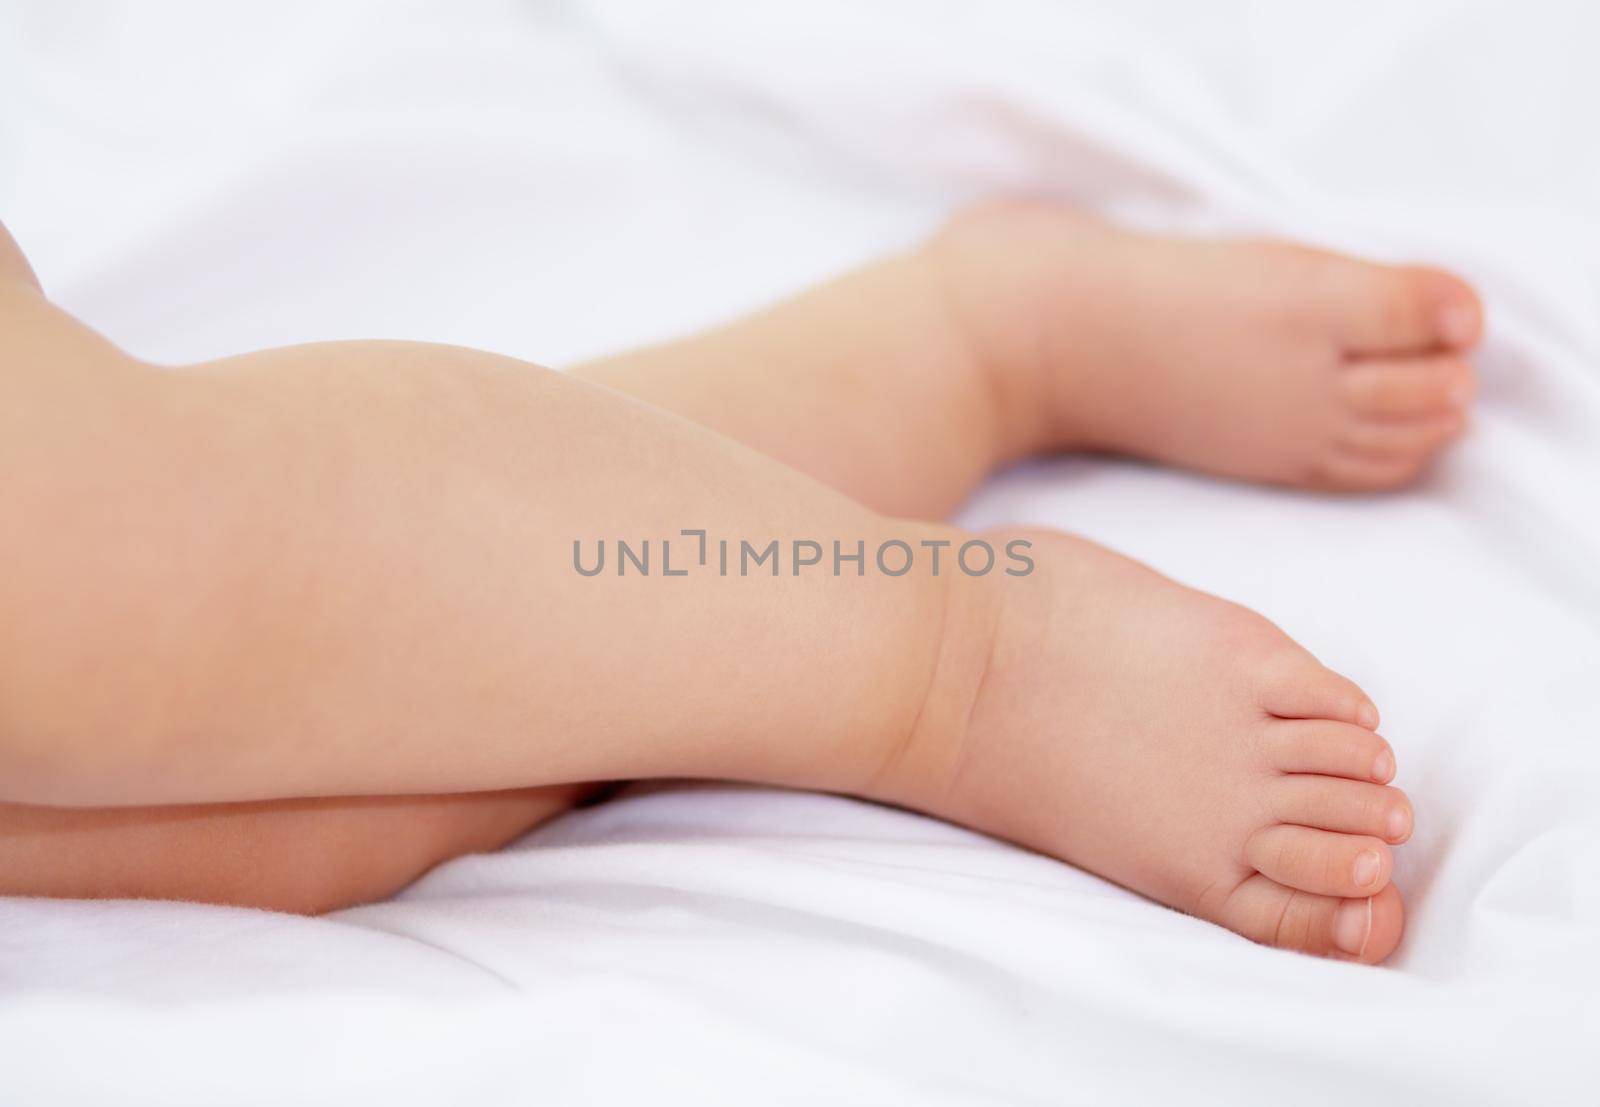 Tired little feet. Cropped image of a babys feet on the bed